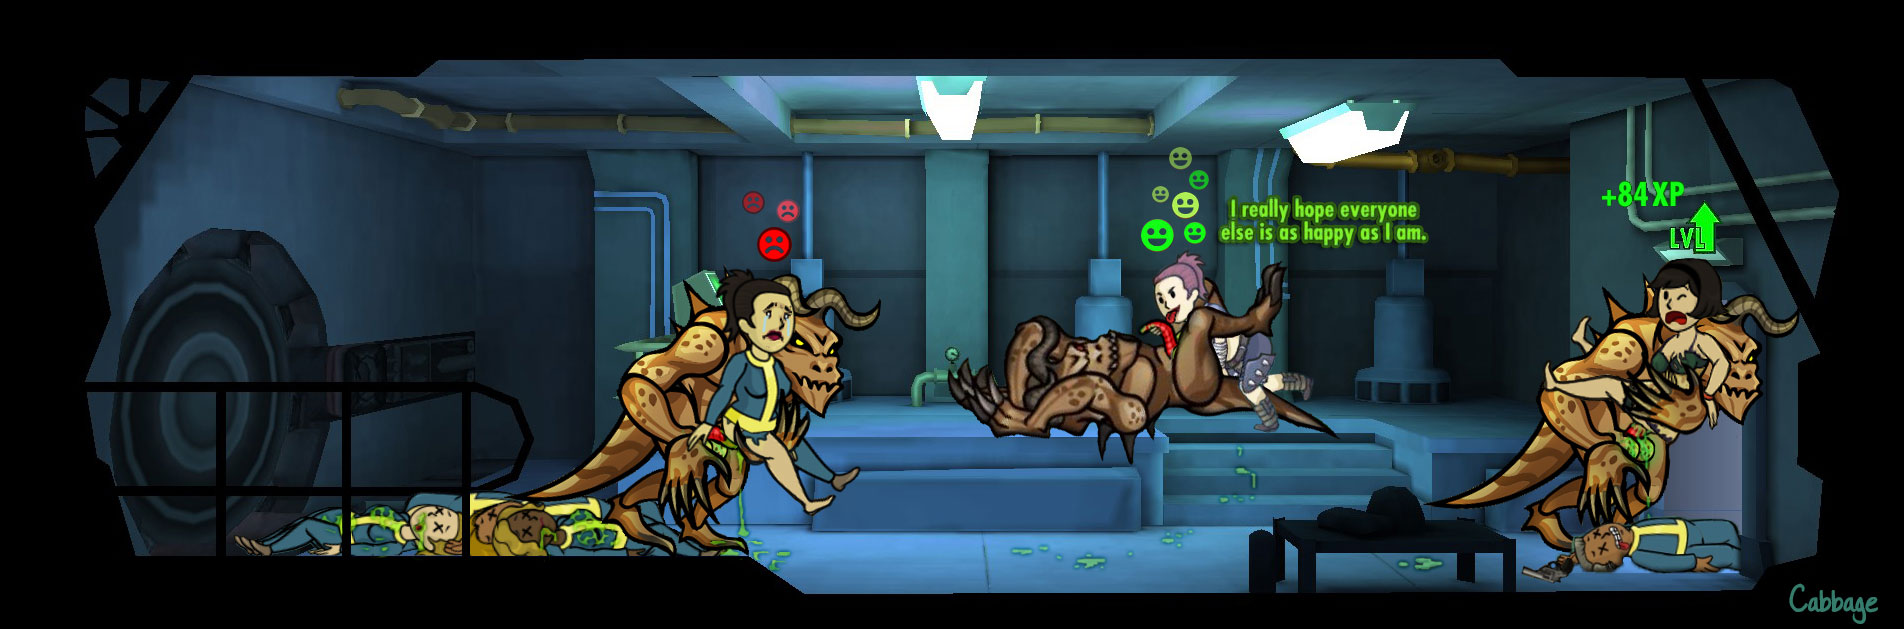 Fallout_Shelter_deathclaws.jpg